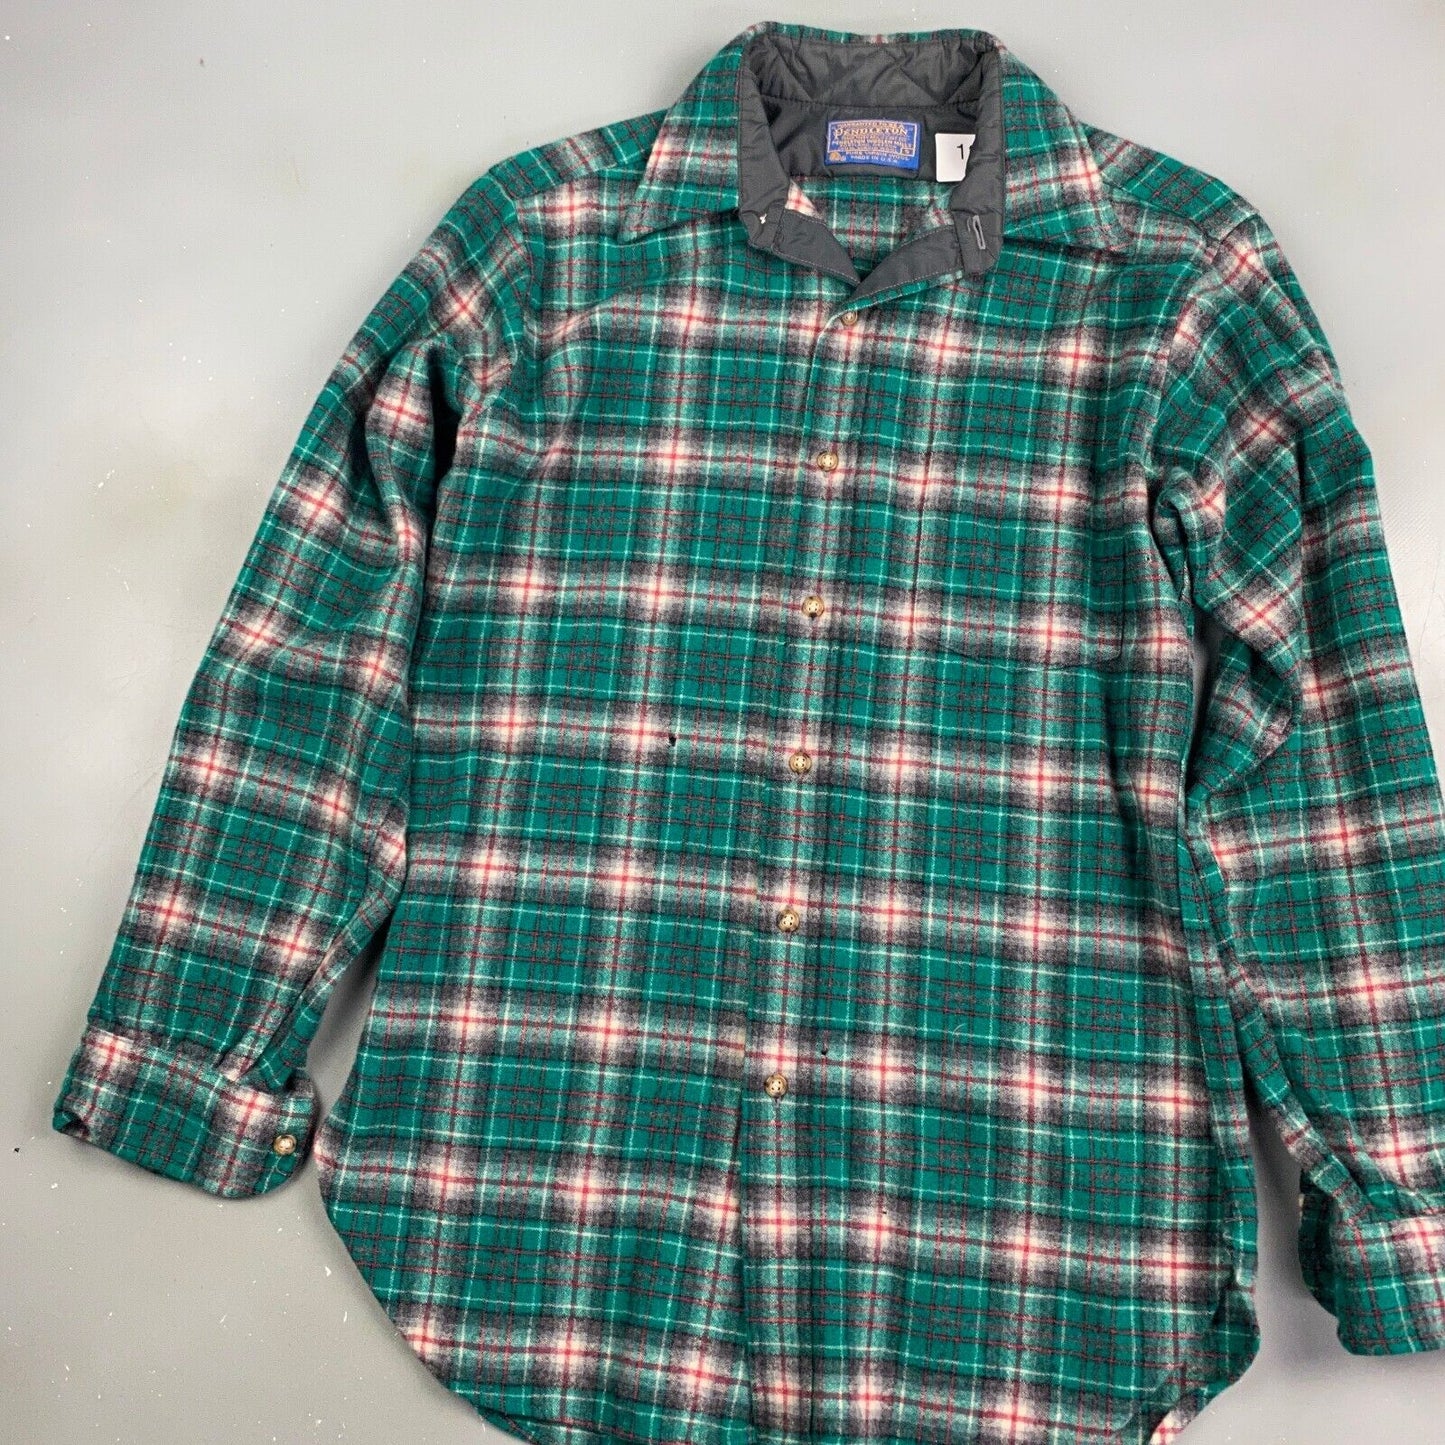 VINTAGE 90s Pendleton Green Wool Plaid Flannel Button Up Shirt sz Small Adult